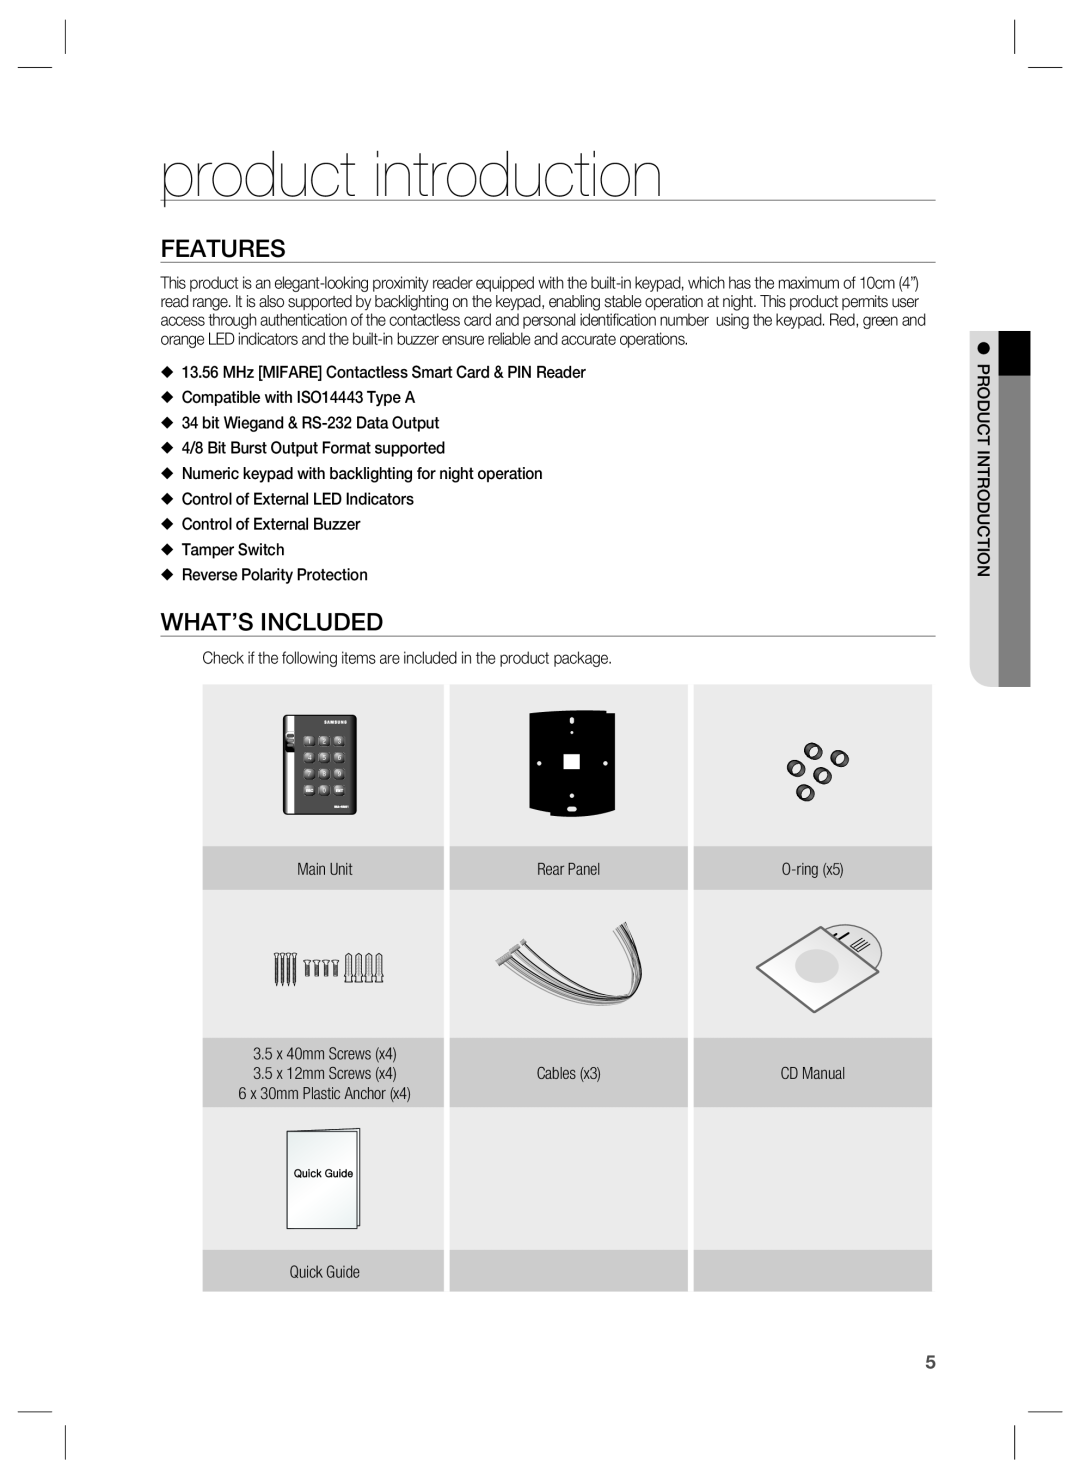 Samsung SSA-R2001 user manual product introduction, Features, What’S Included 